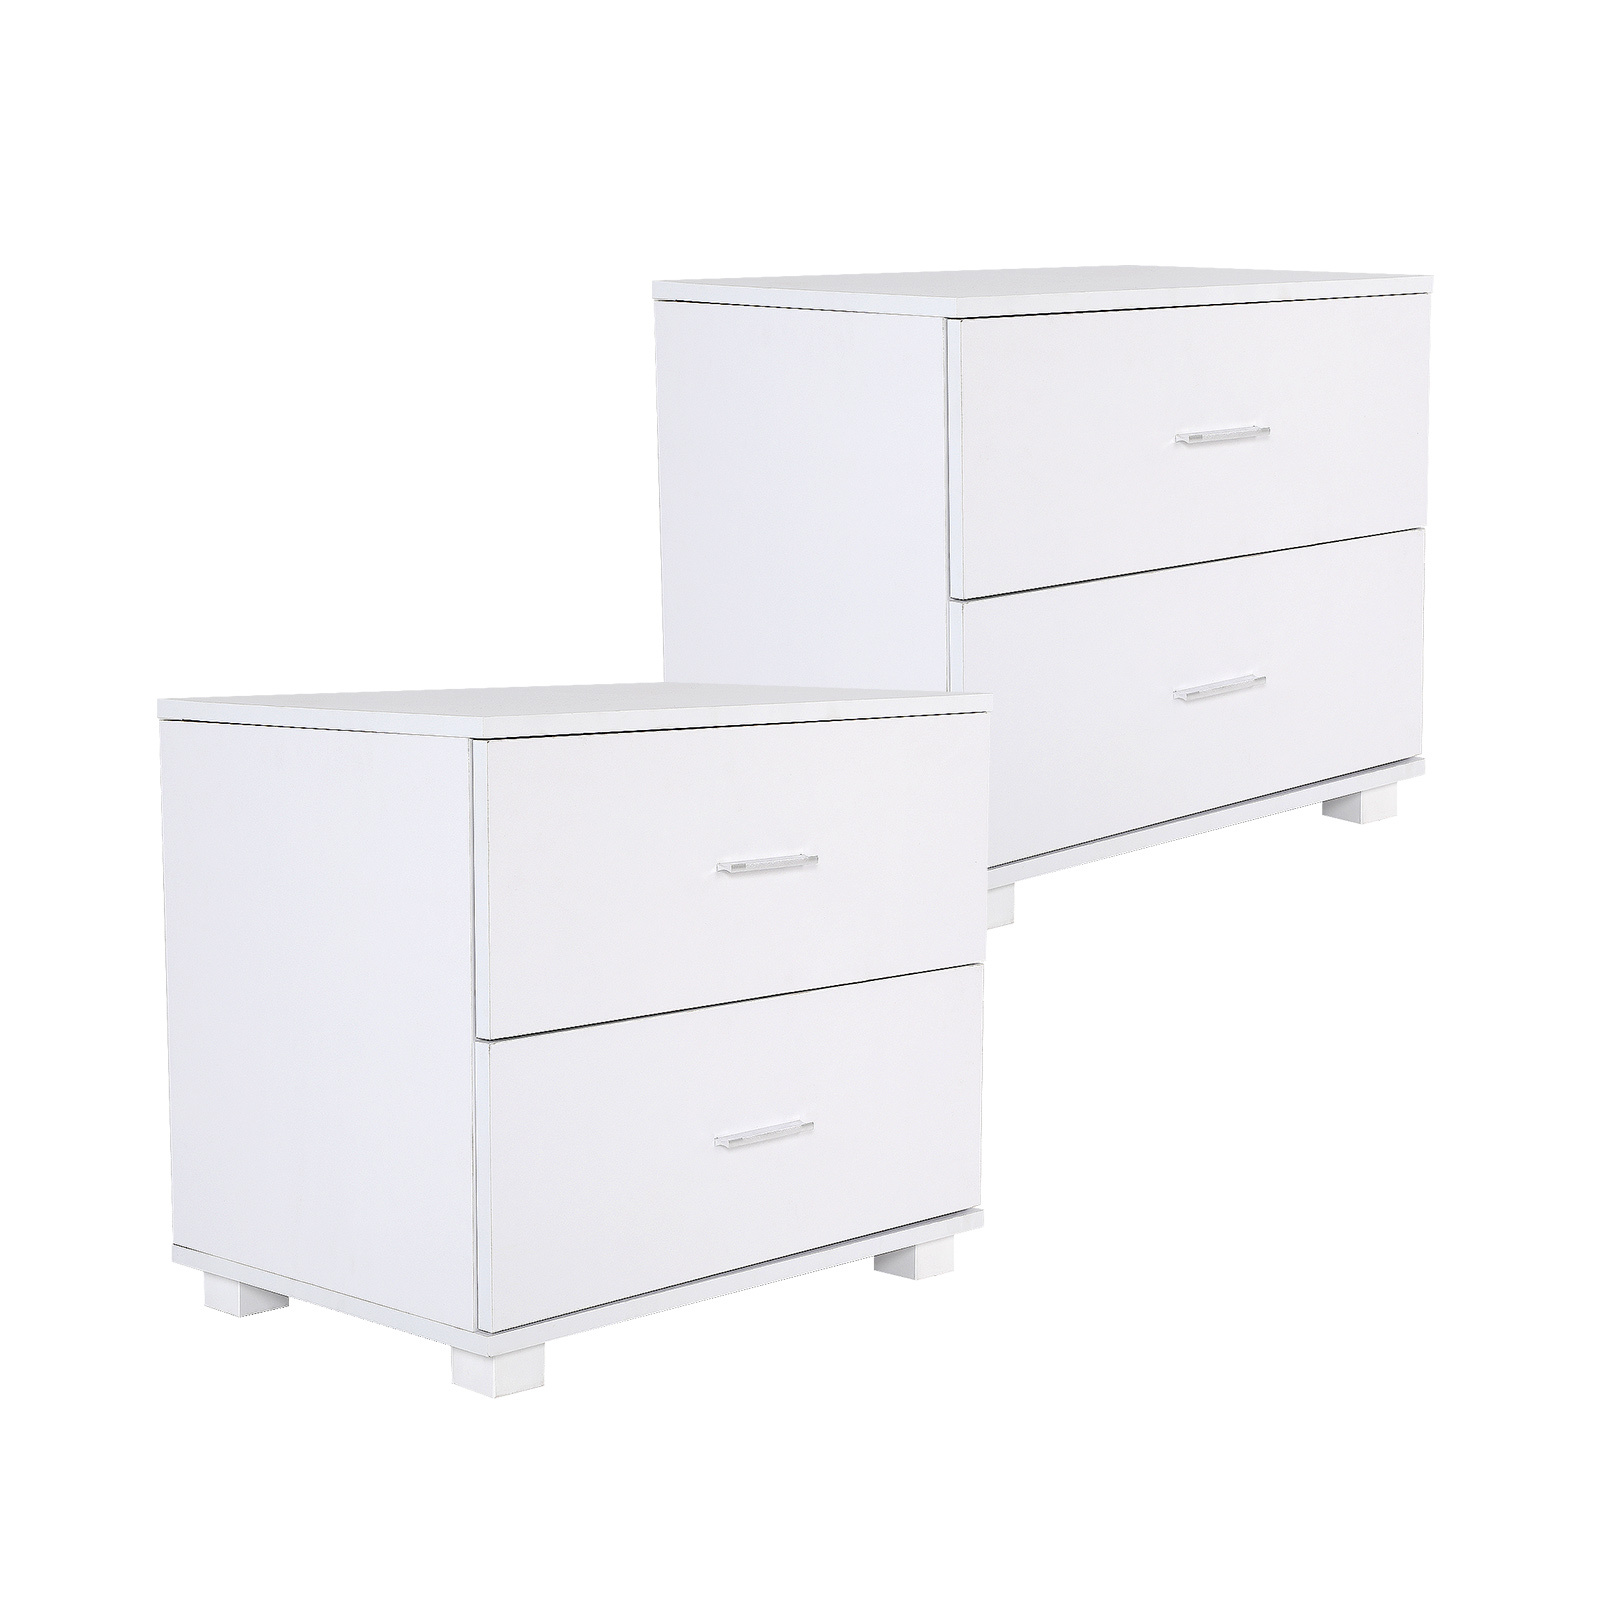 2X Bedside Tables 2 Drawer With Legs ETTA - WHITE